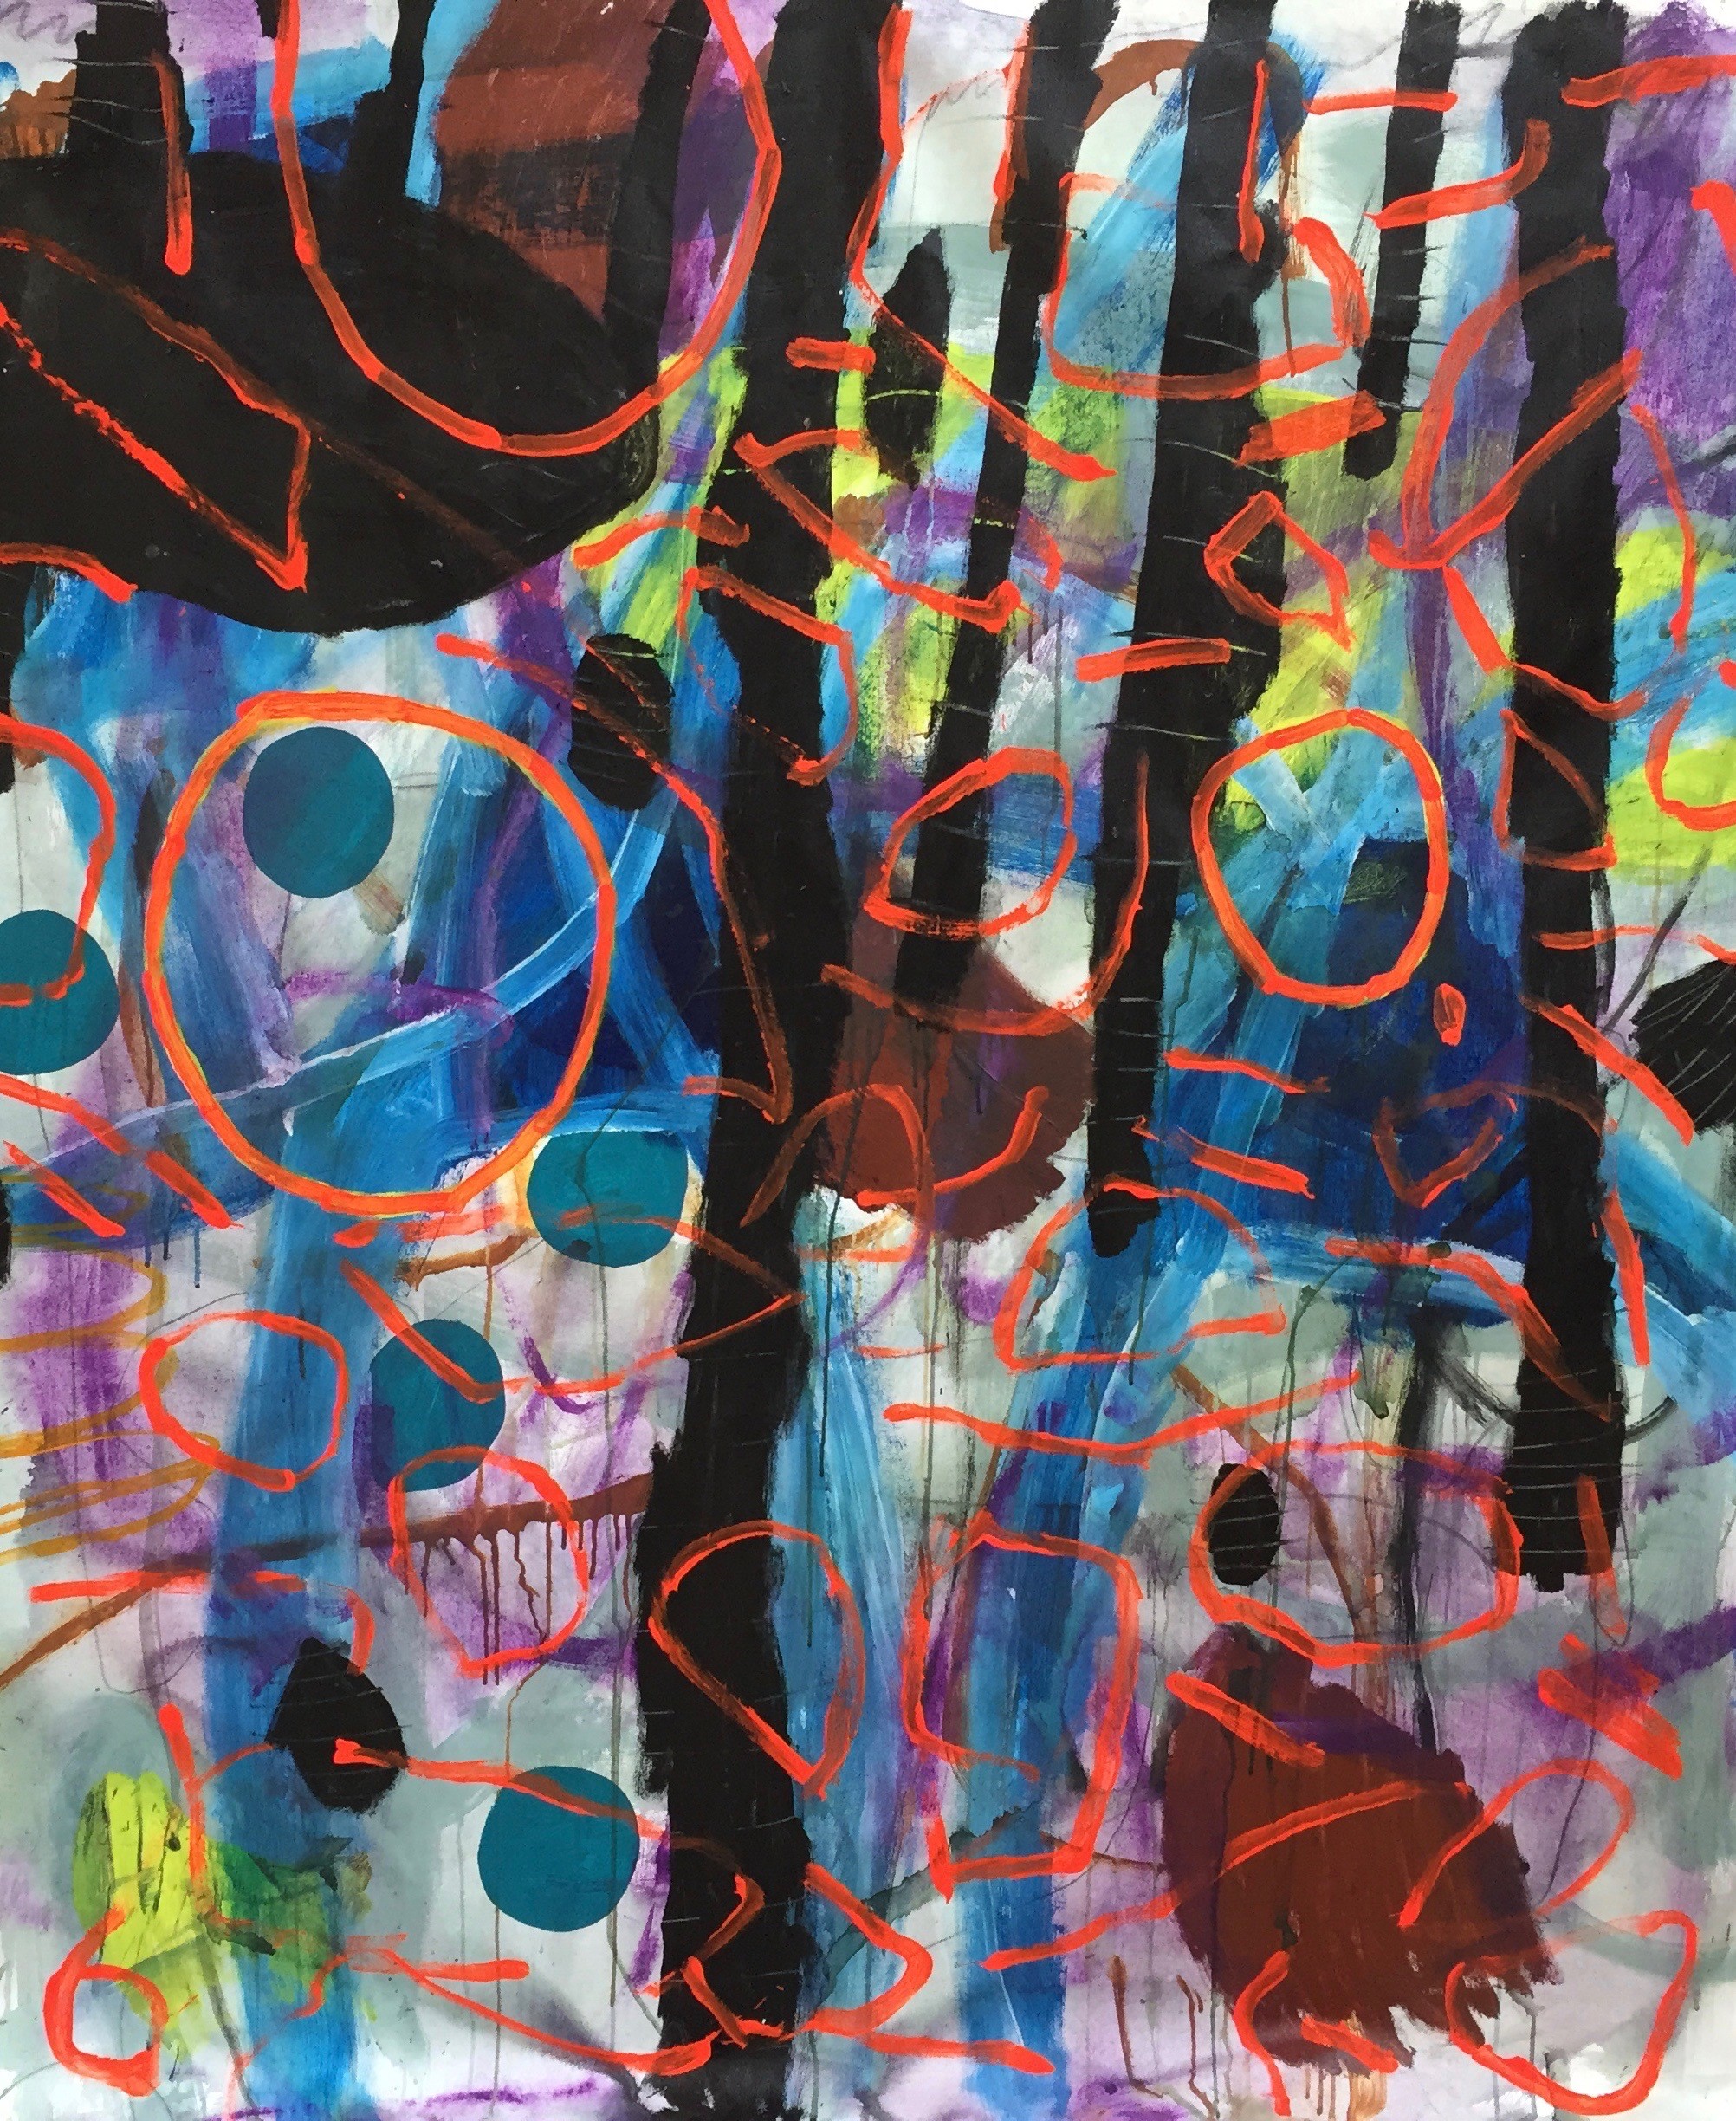 Al Poulet, 'Untitled (Trees on the March)', 2019, acrylic on canvas, 173 x 139cm, $9,900 | Provenance: Private Collection, Sydney.